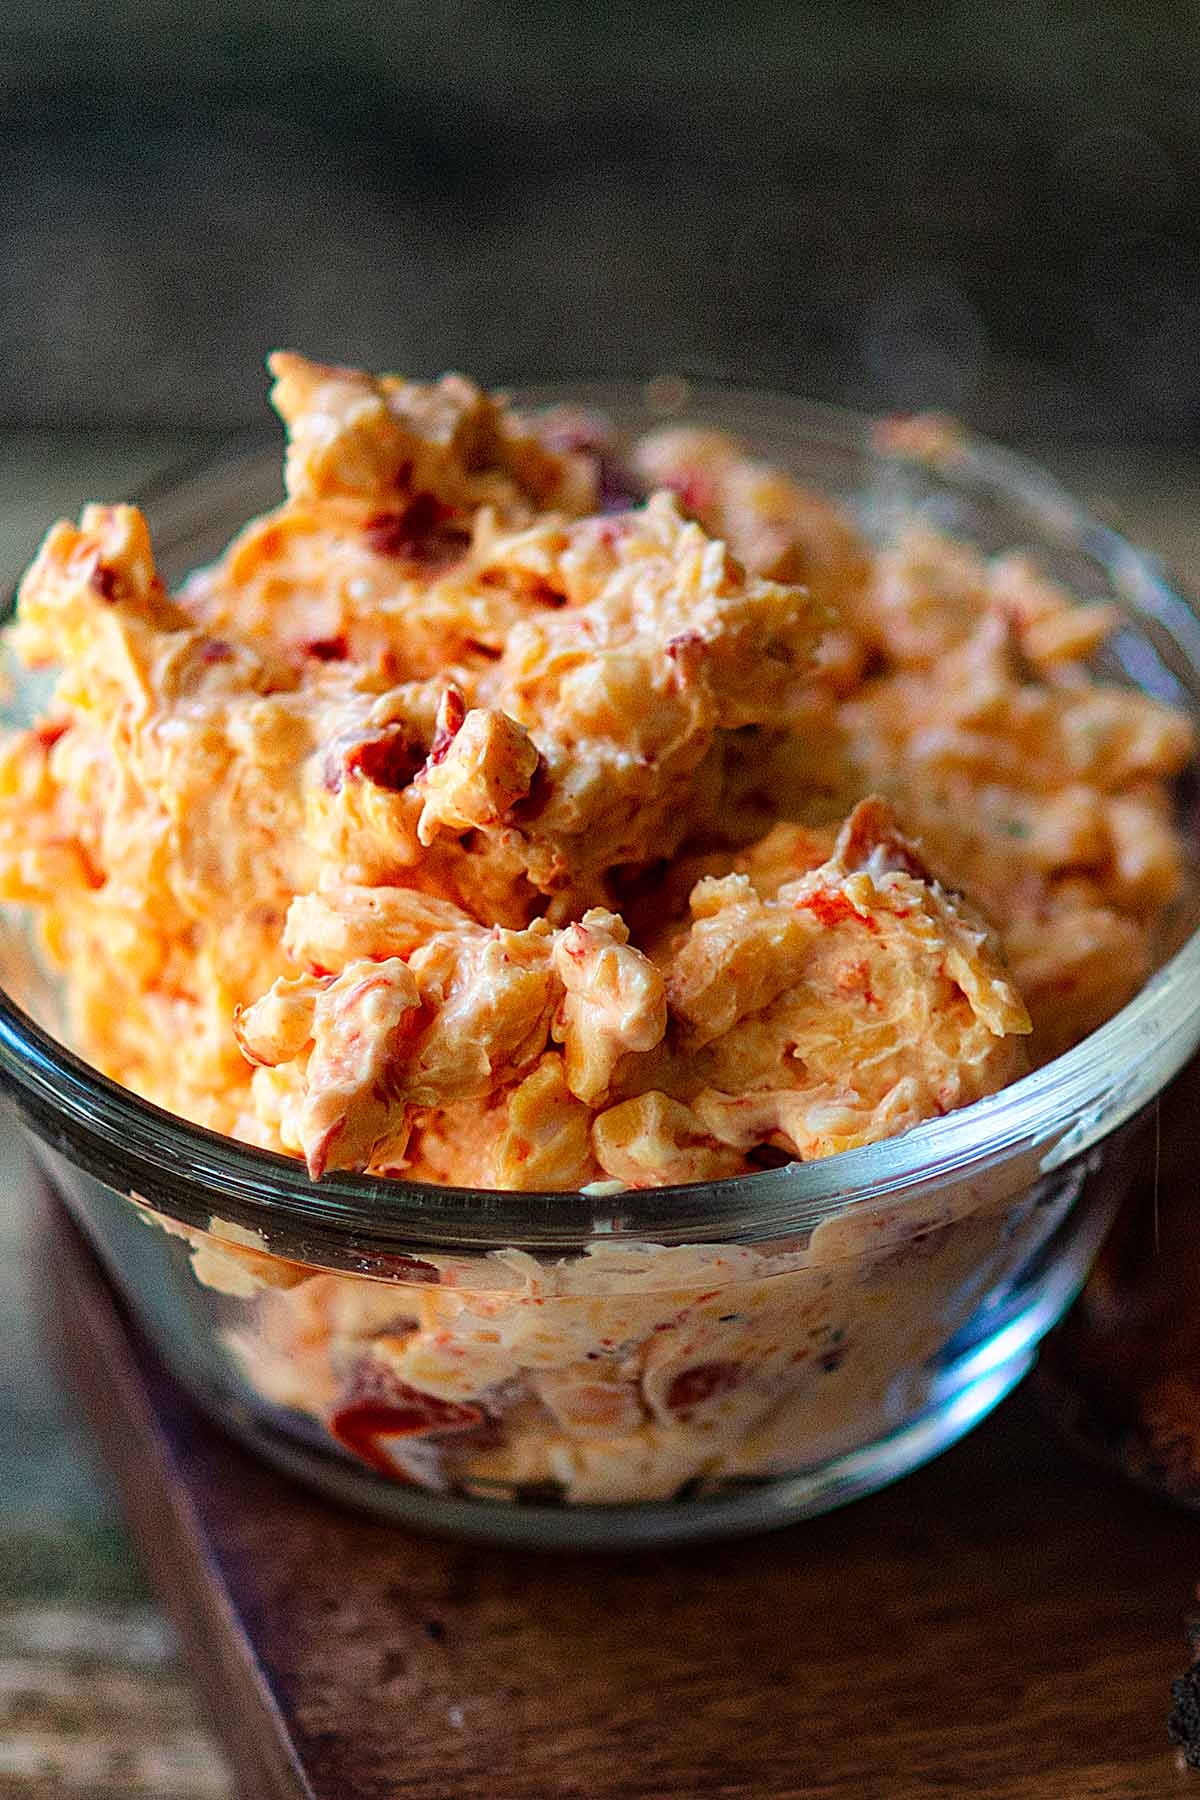 Homemade pimento cheese served in a clear dish.